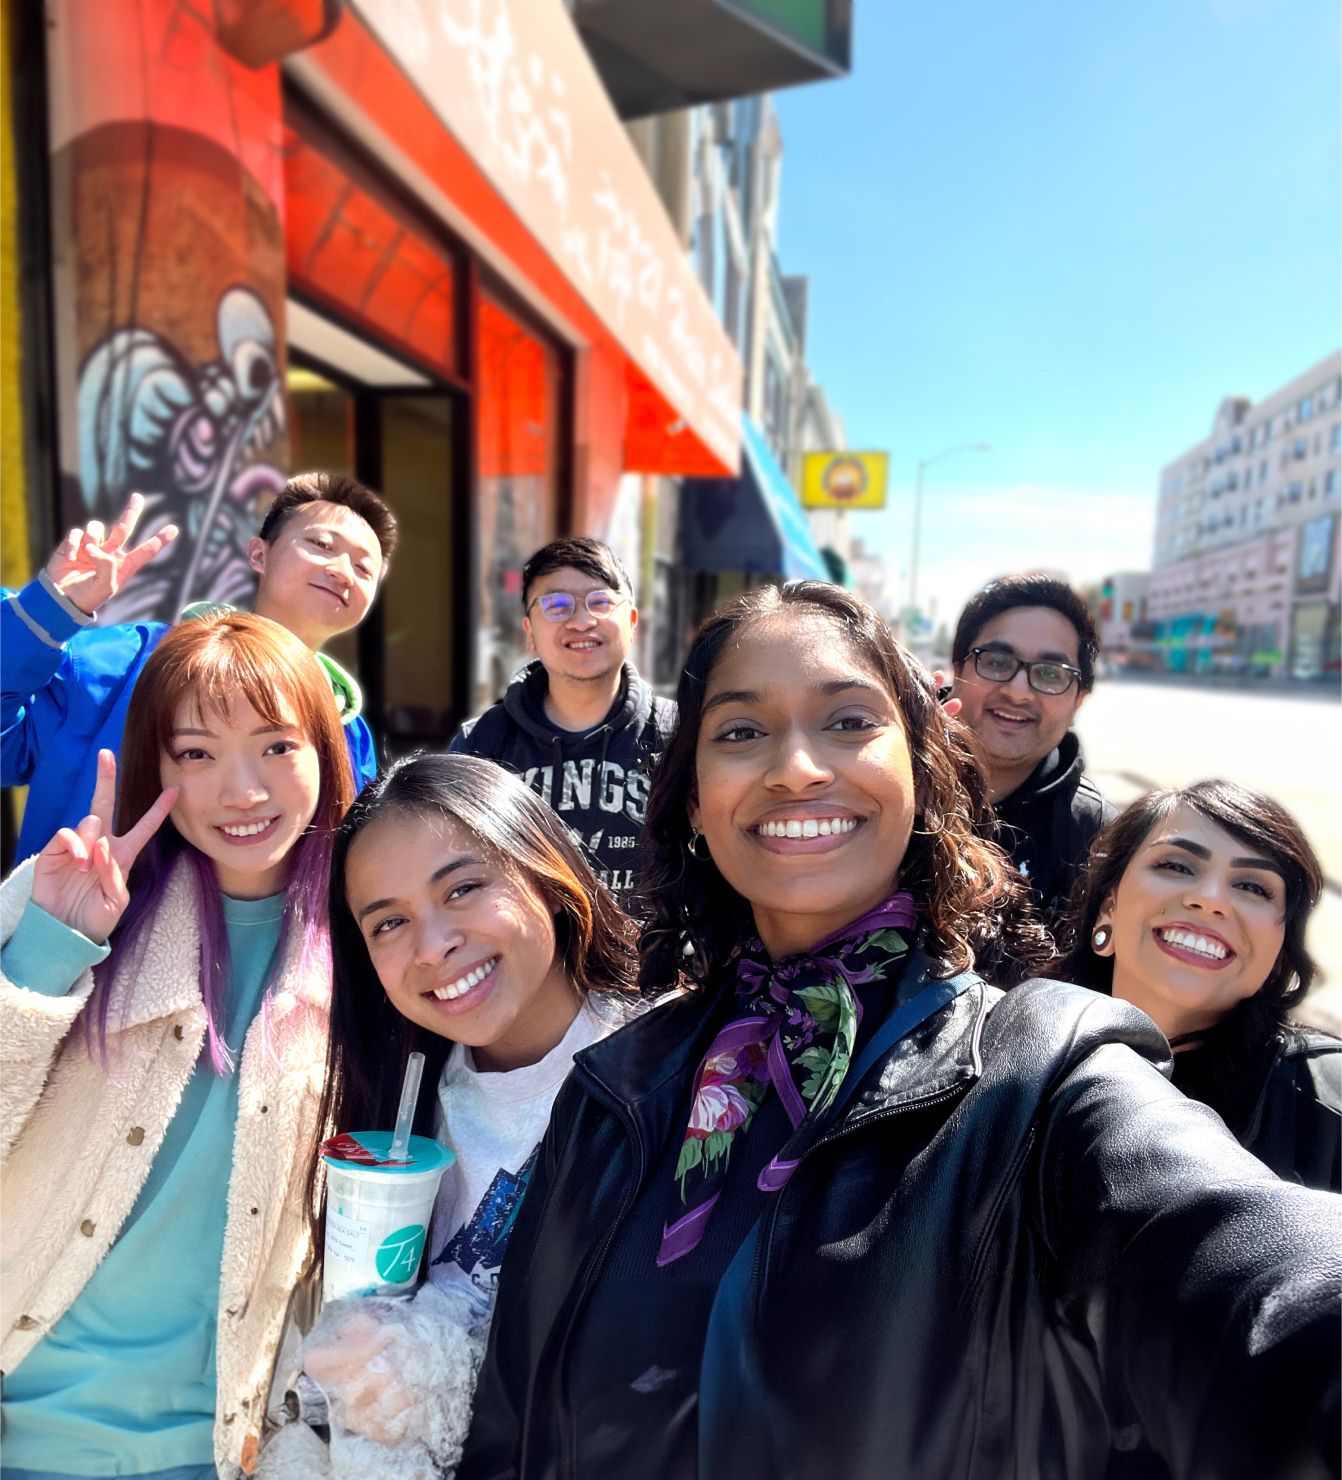 7 people smiling posing for a selfie during an outing.